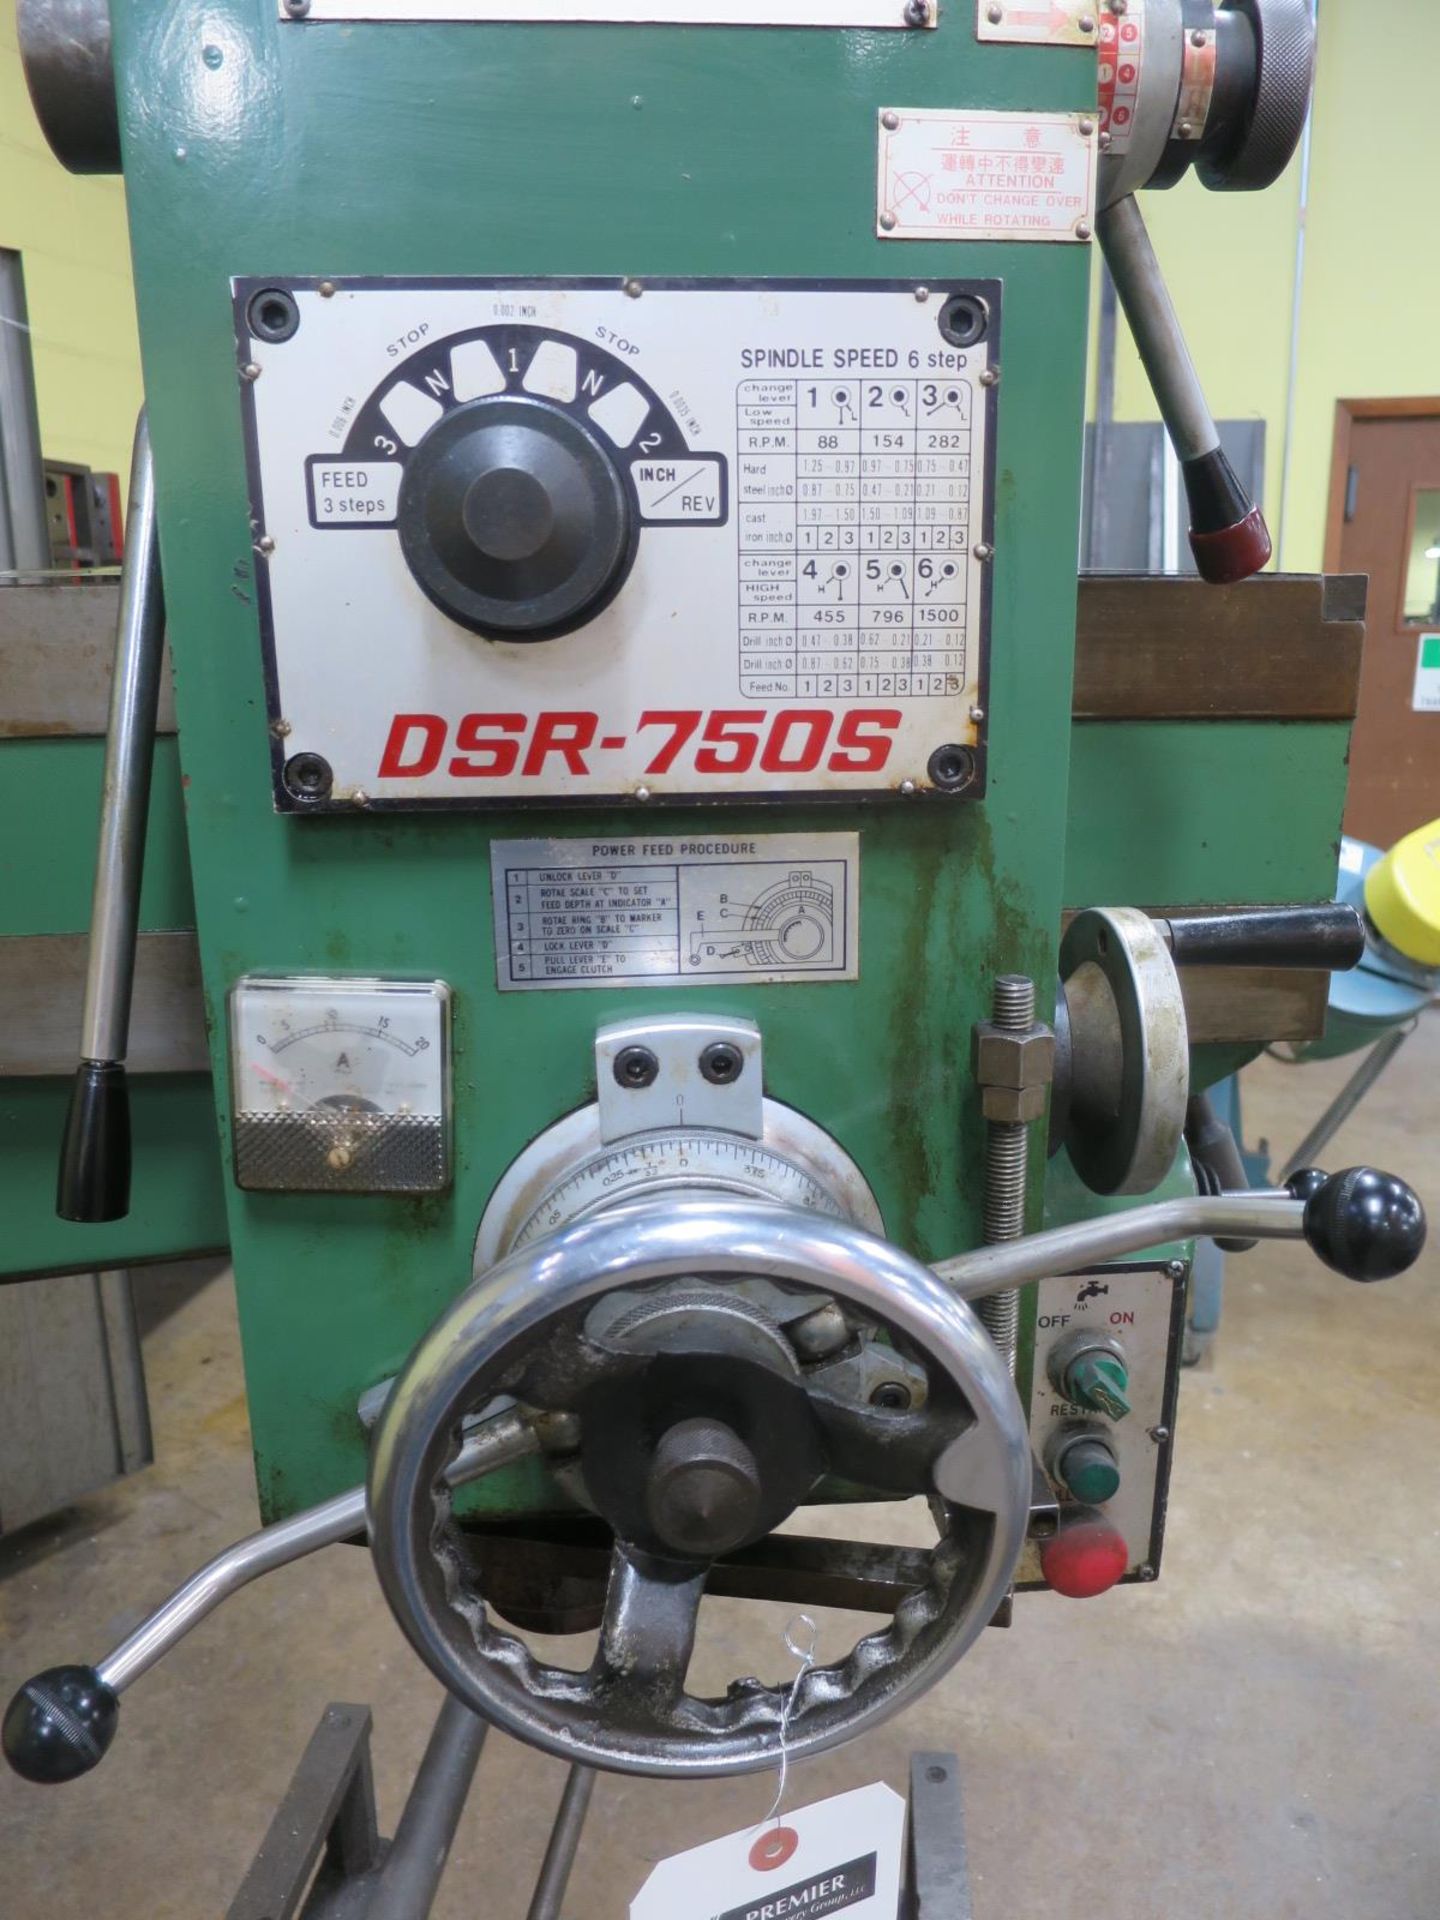 Enco Radial Arm Drill 128-4220, Dsr-750S Control, Sn 19856 - Image 3 of 5